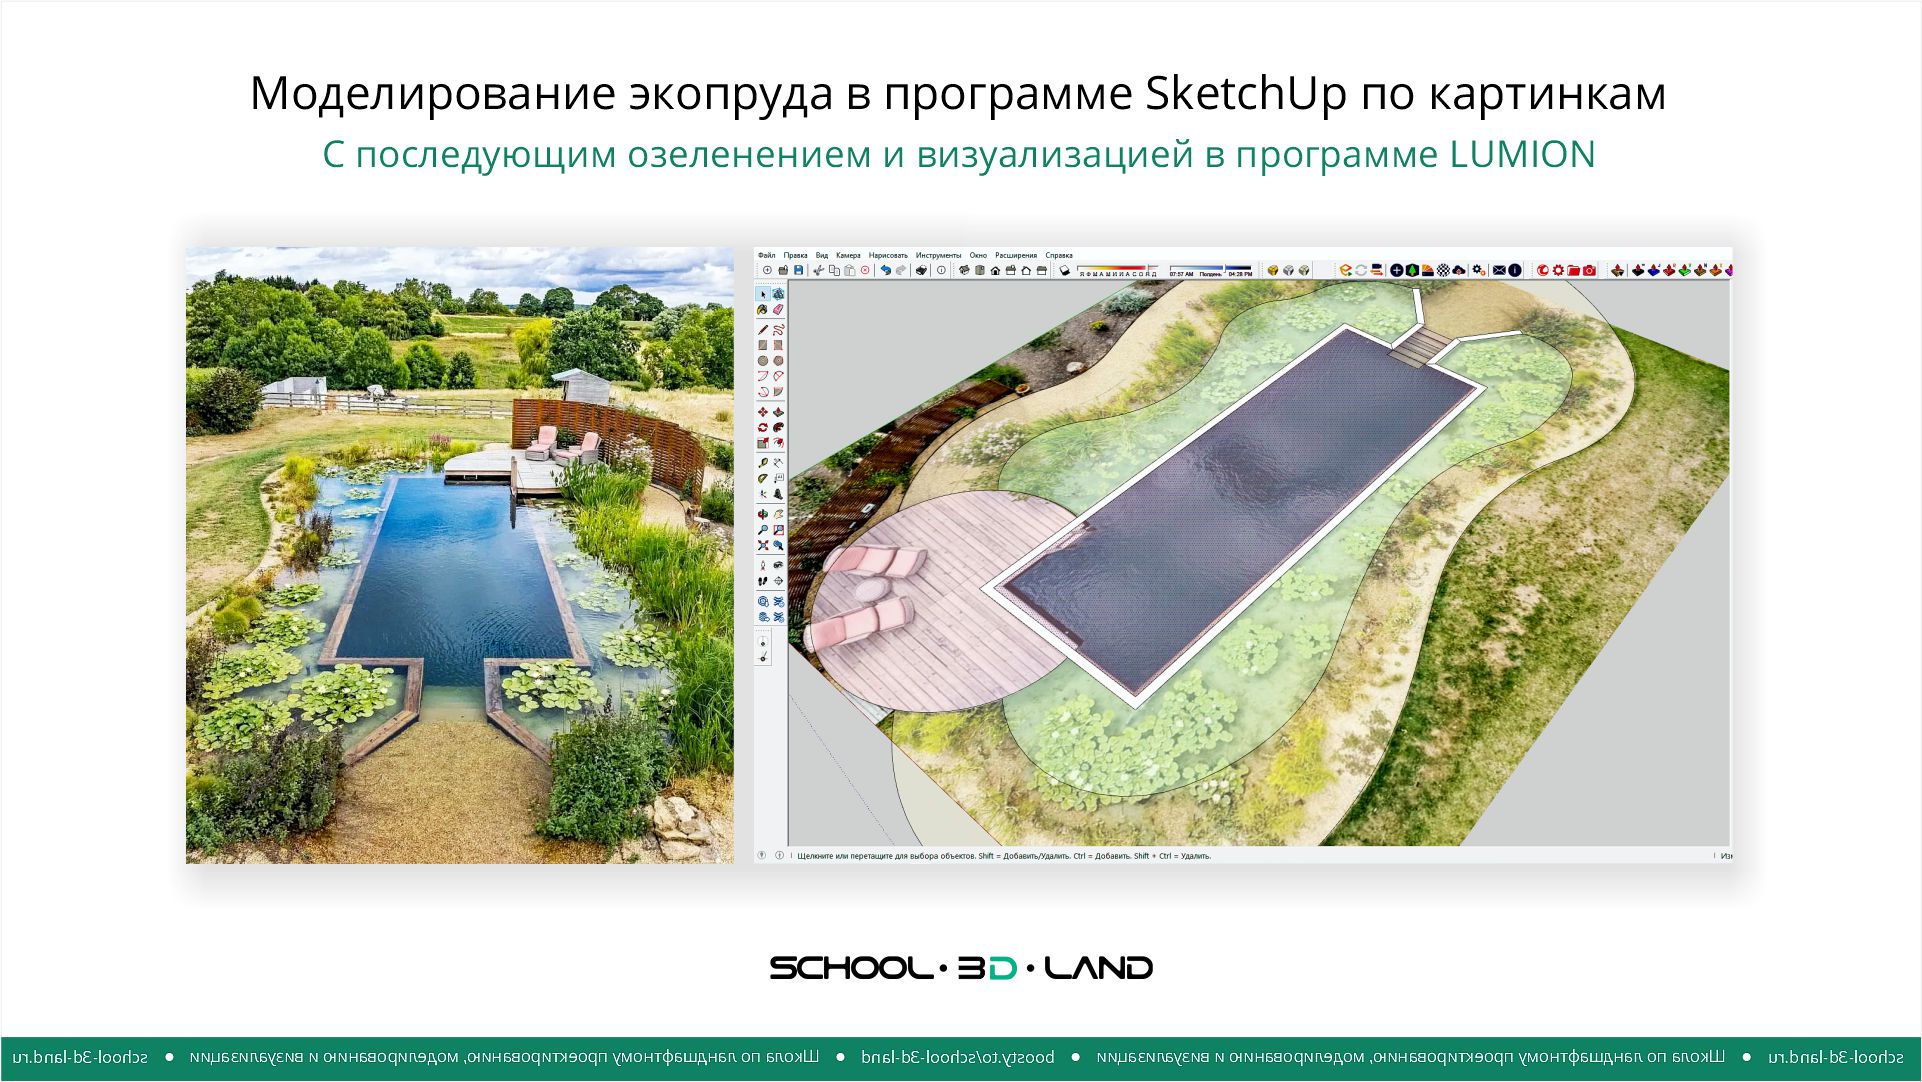 Modeling an eco-pond in SketchUp using pictures: parts 1-2 and additions: parts 3-4